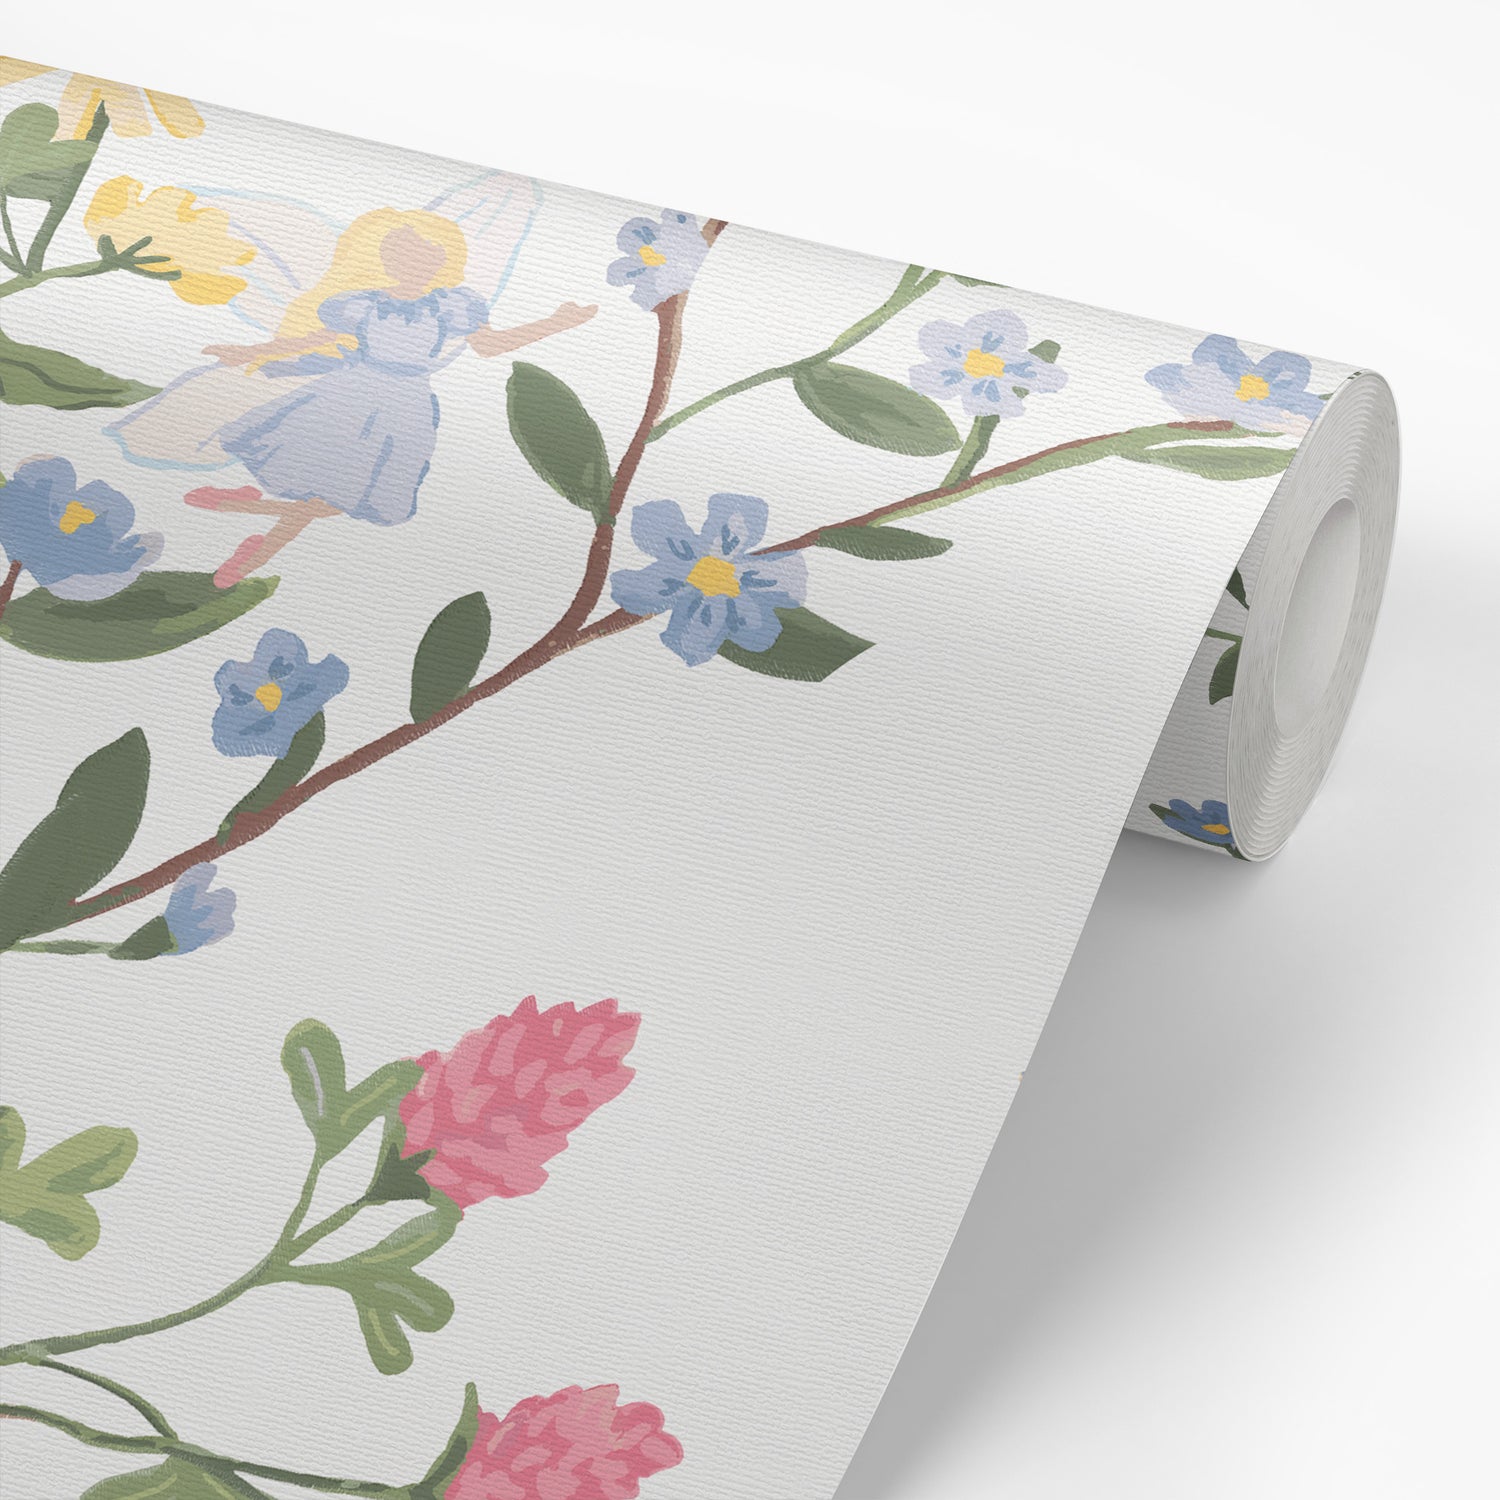 Wallpaper Planel close up Playroom featuring- Fairy Tale Wallpaper - a floral pattern